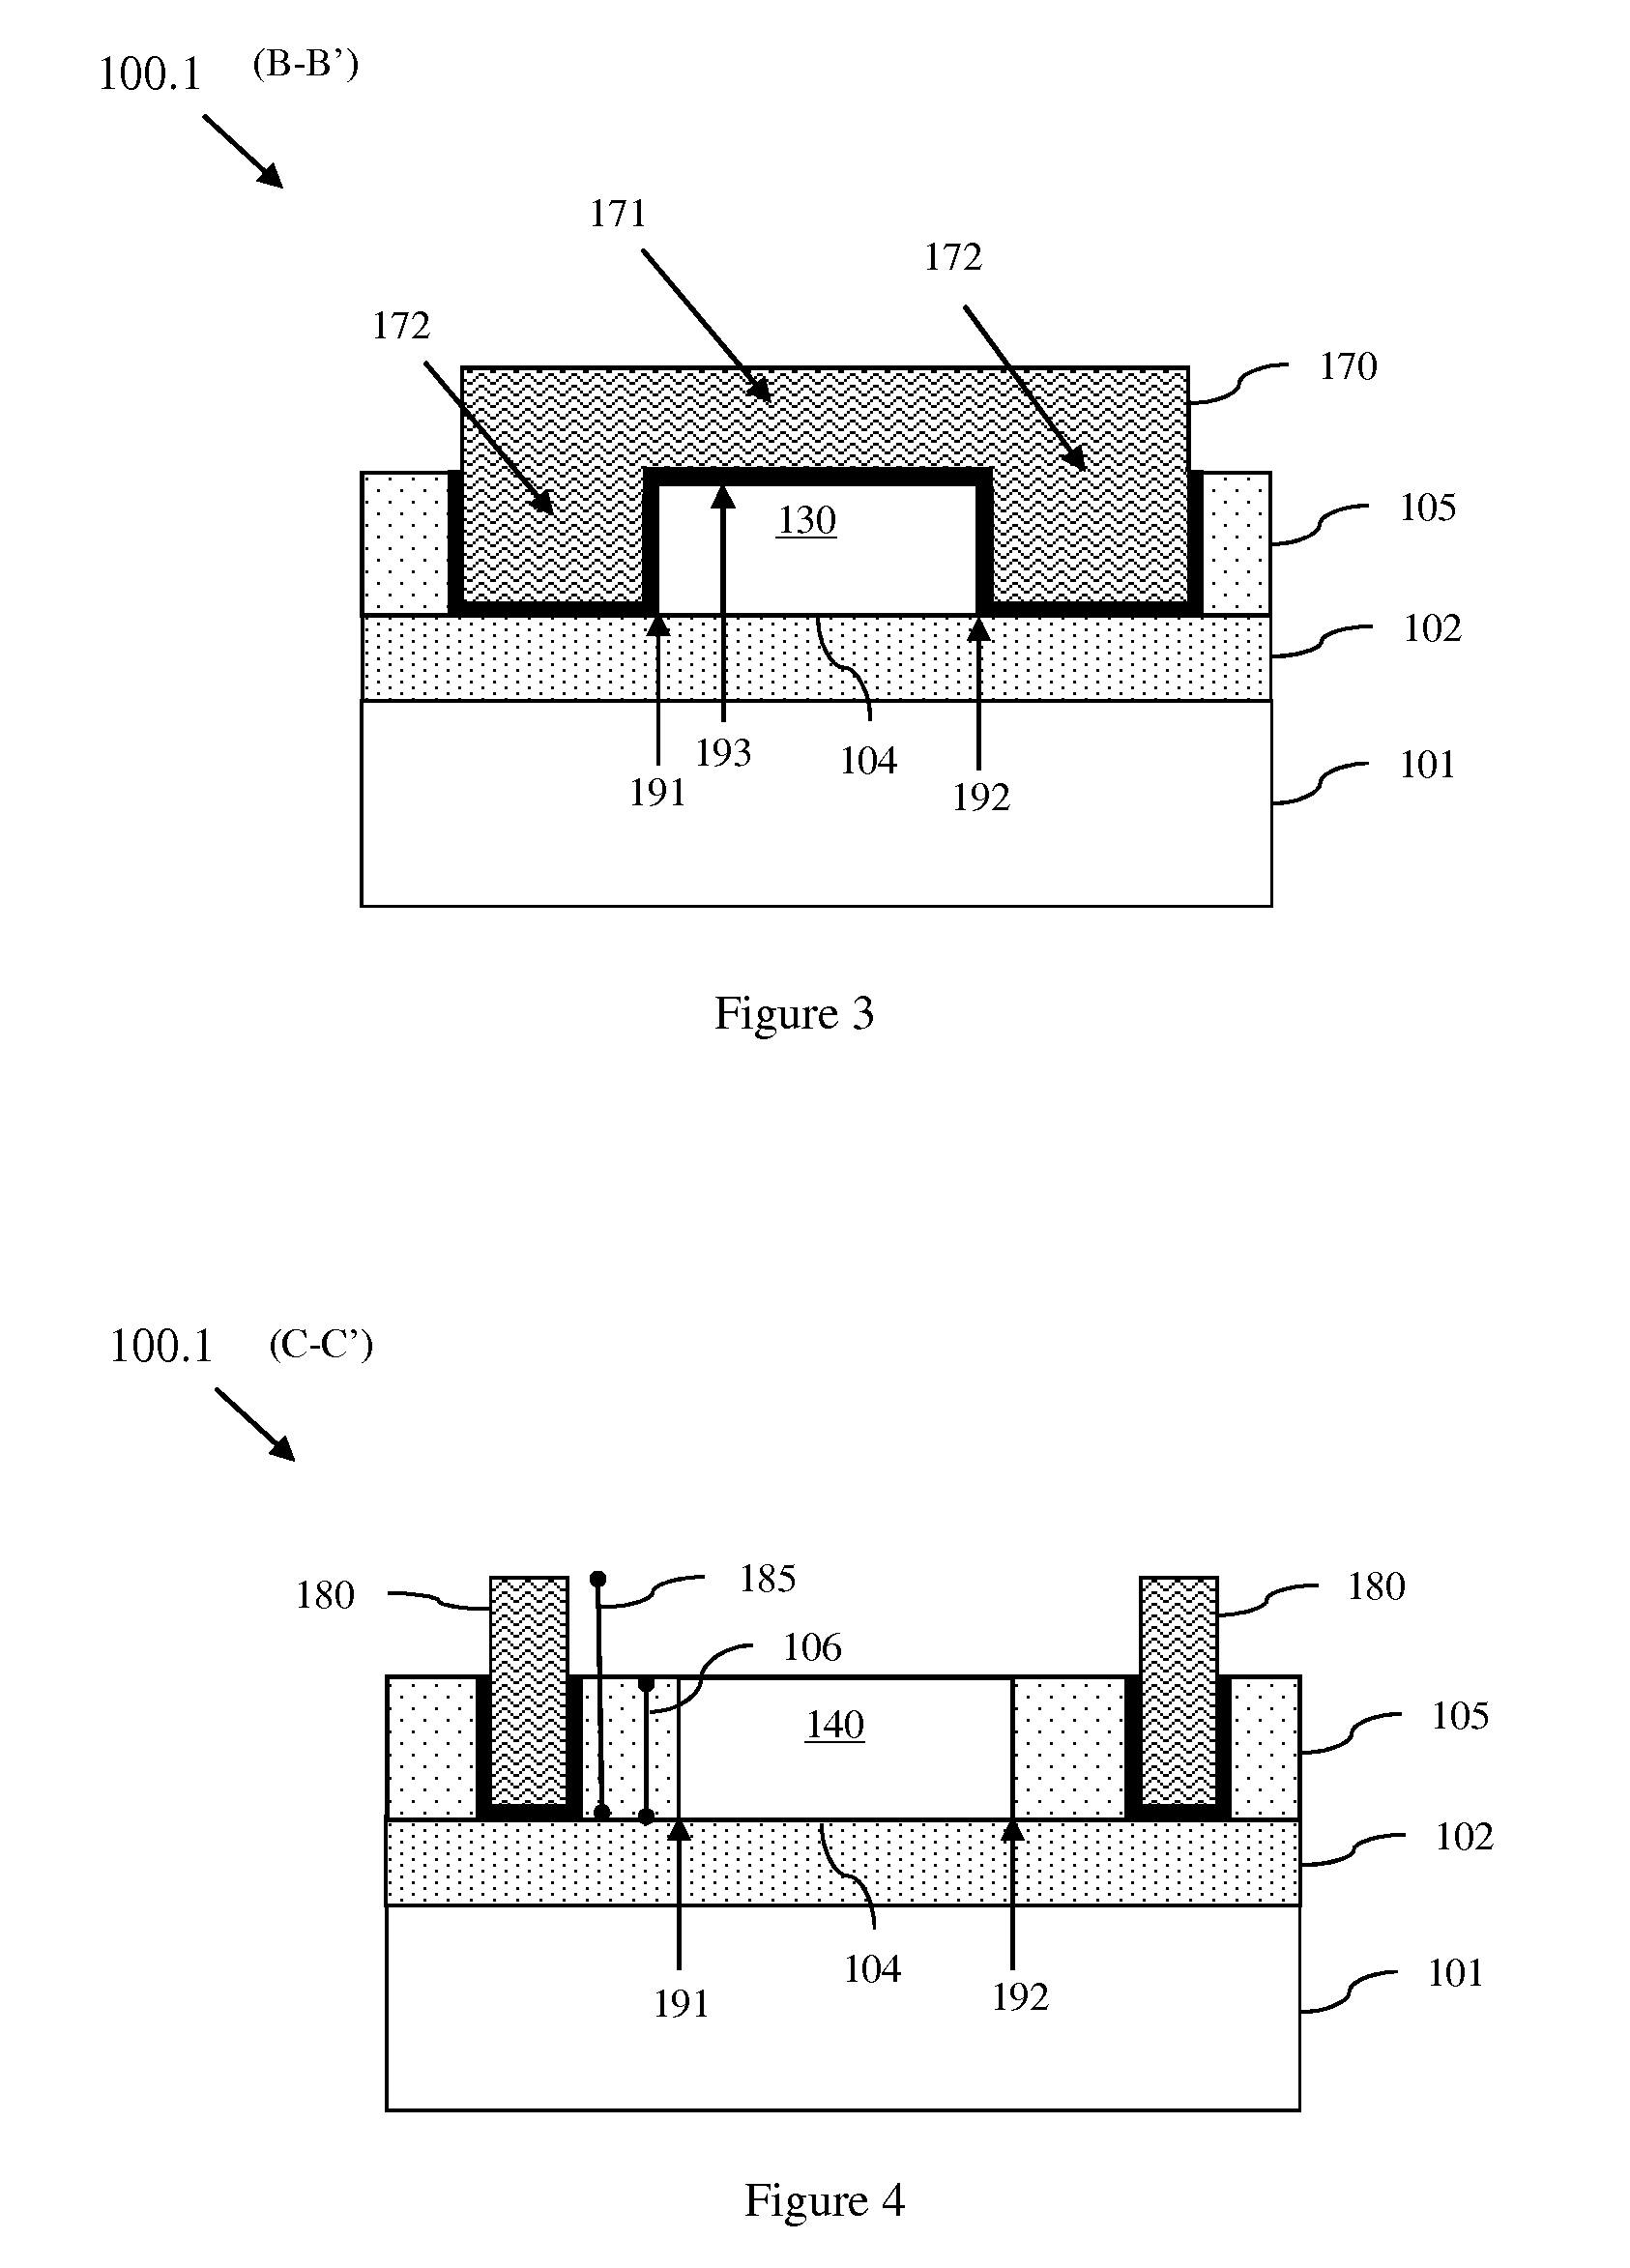 Lateral extended drain metal oxide semiconductor field effect transistor (LEDMOSFET) with tapered dielectric plates